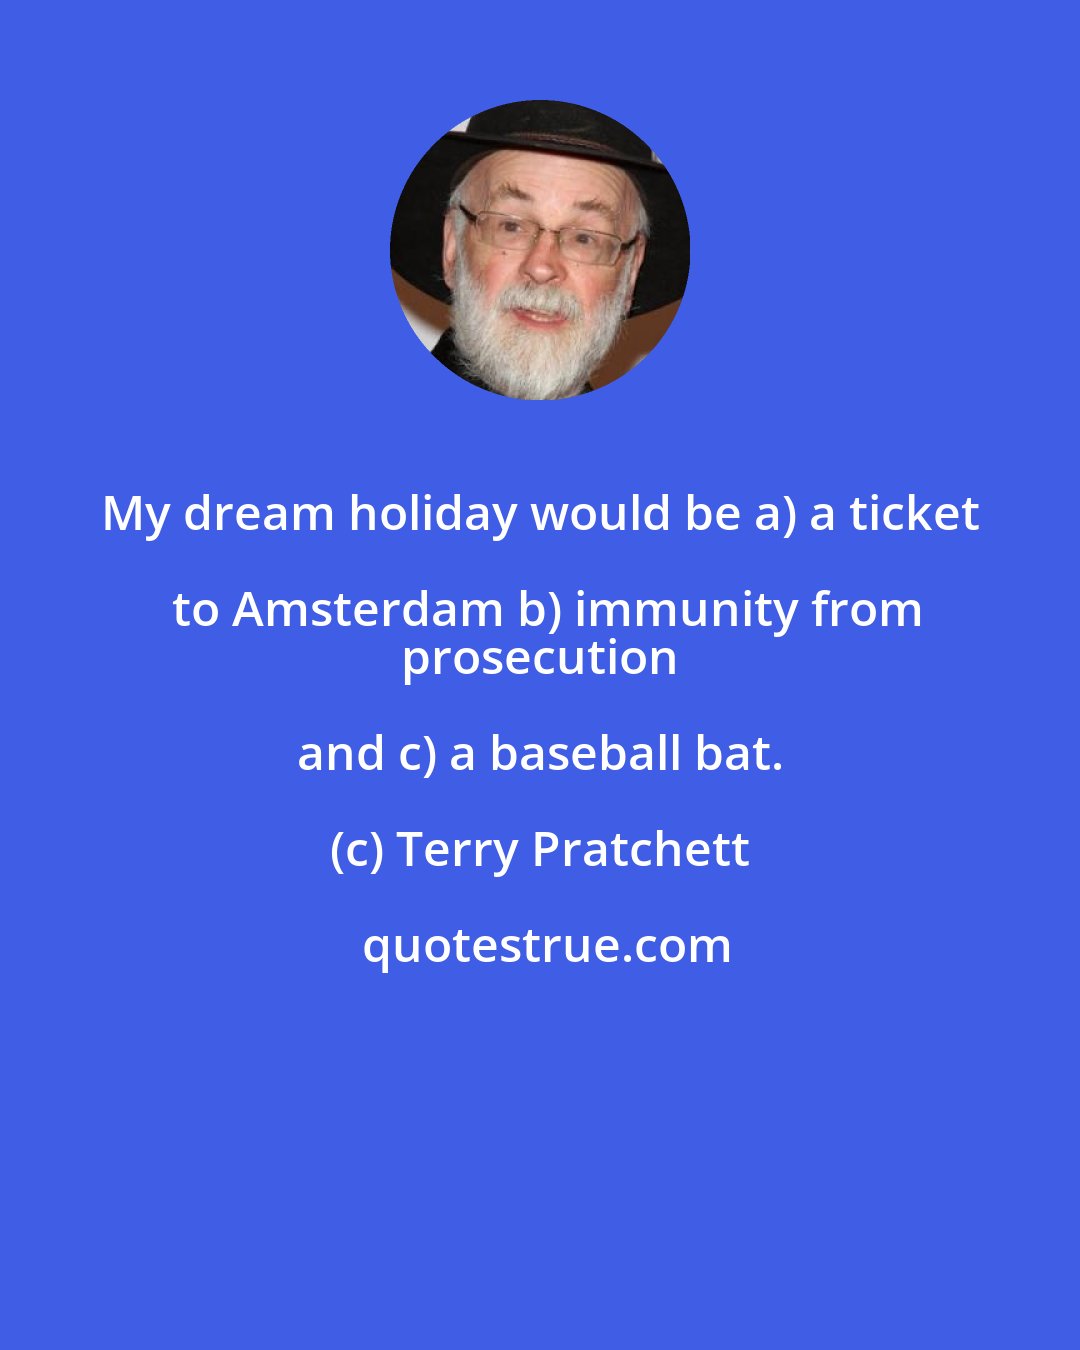 Terry Pratchett: My dream holiday would be a) a ticket to Amsterdam b) immunity from
 prosecution and c) a baseball bat.